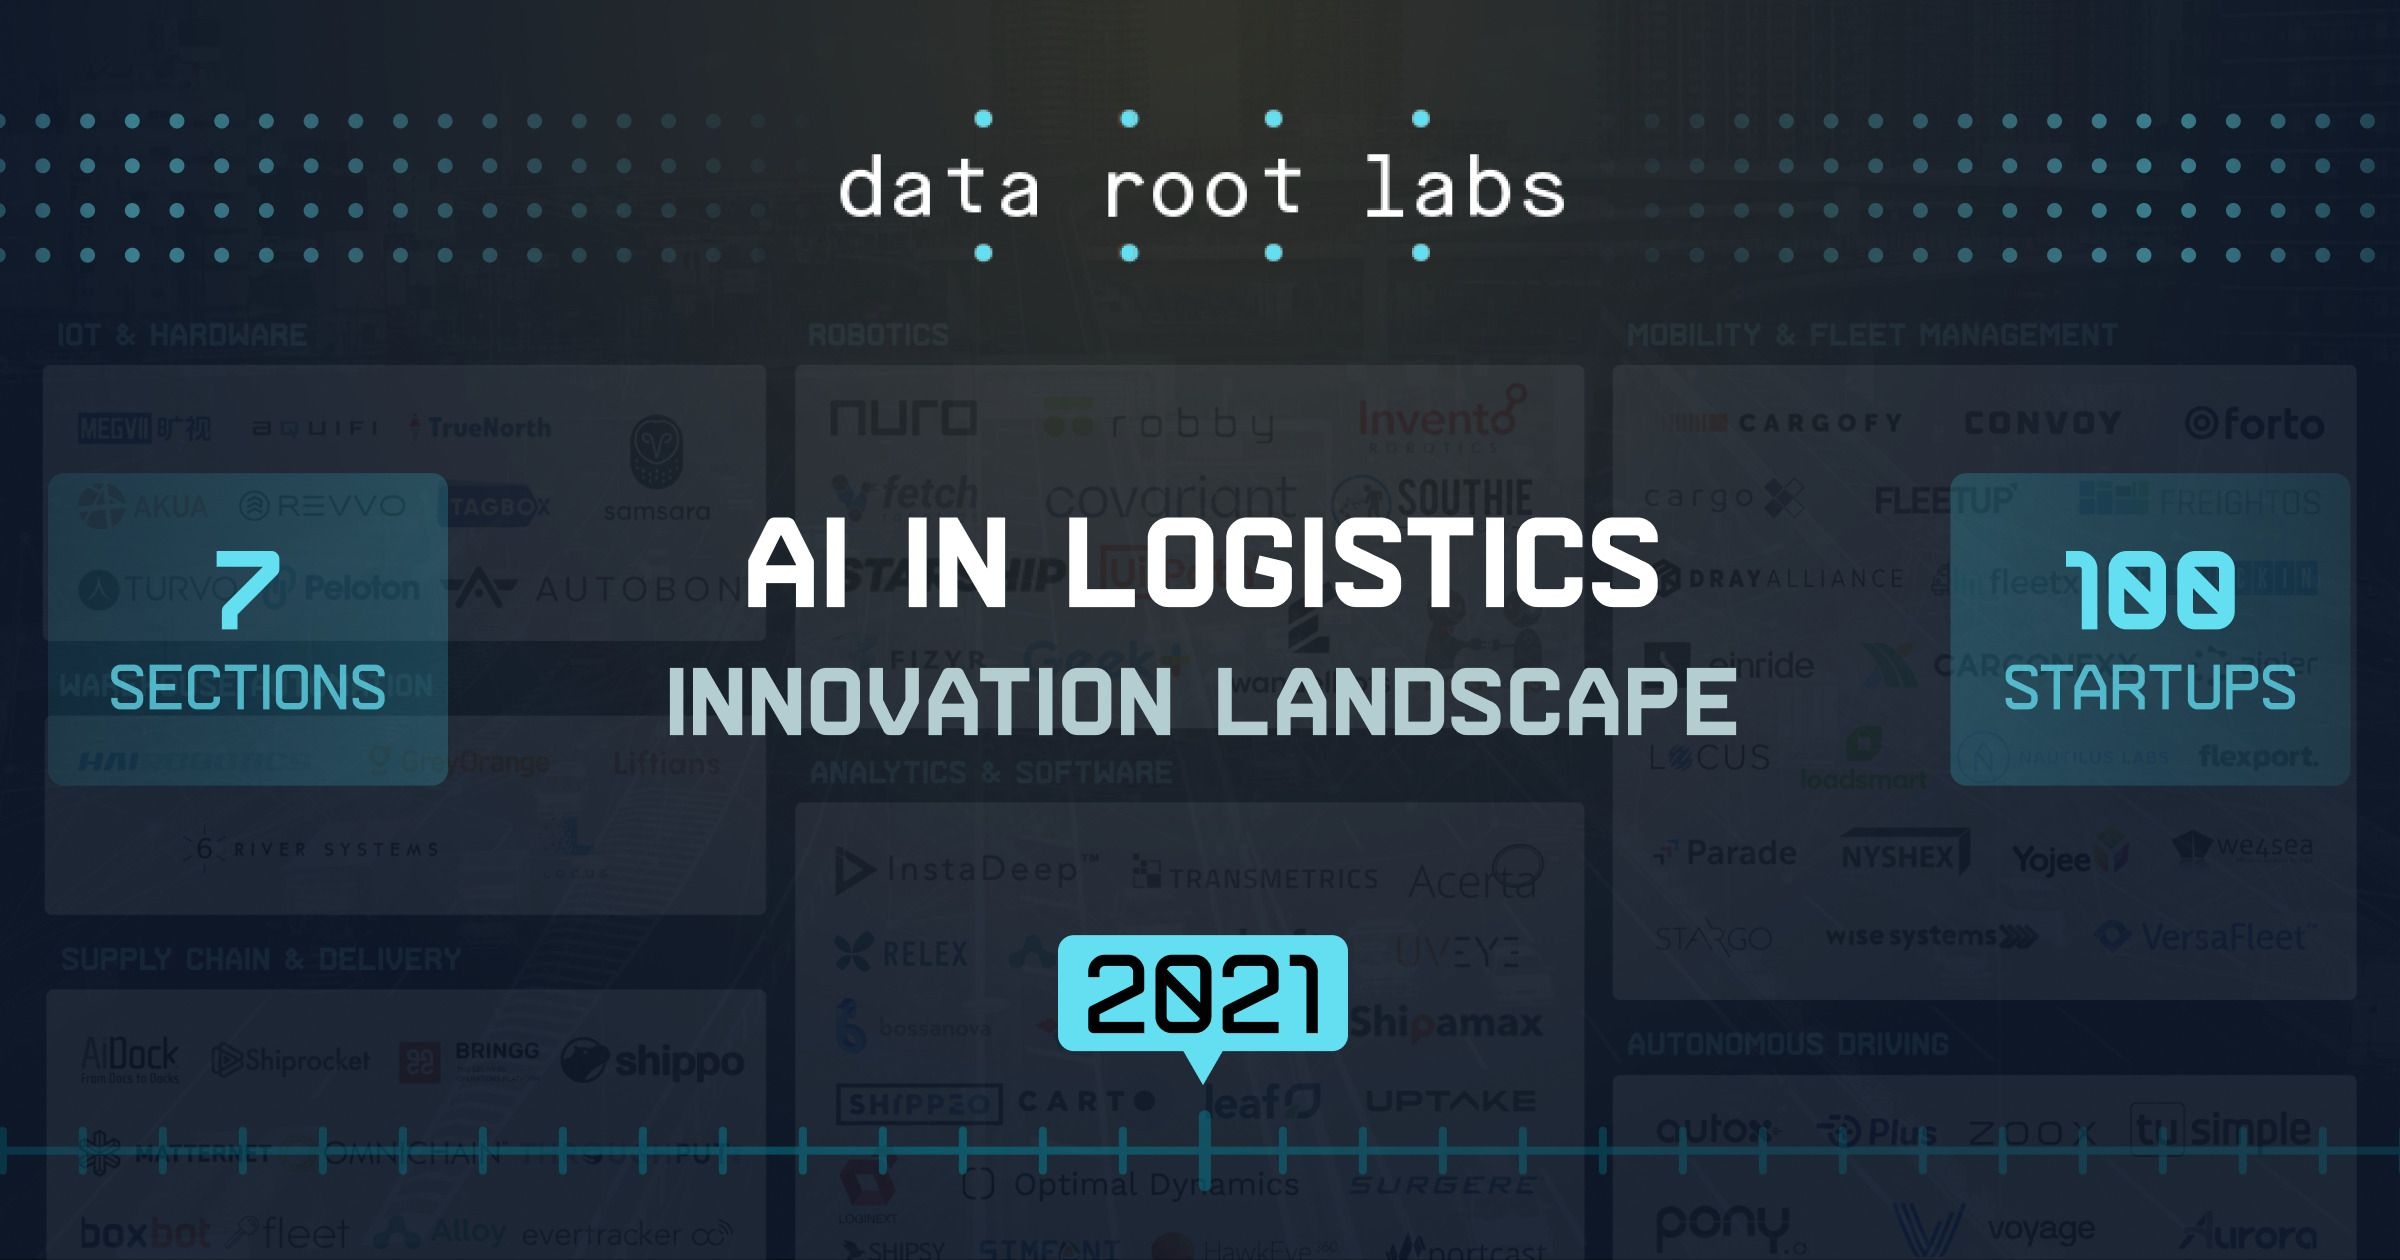 Artificial Intelligence in Logistics: Emerging Startups, Challenges and Use Cases